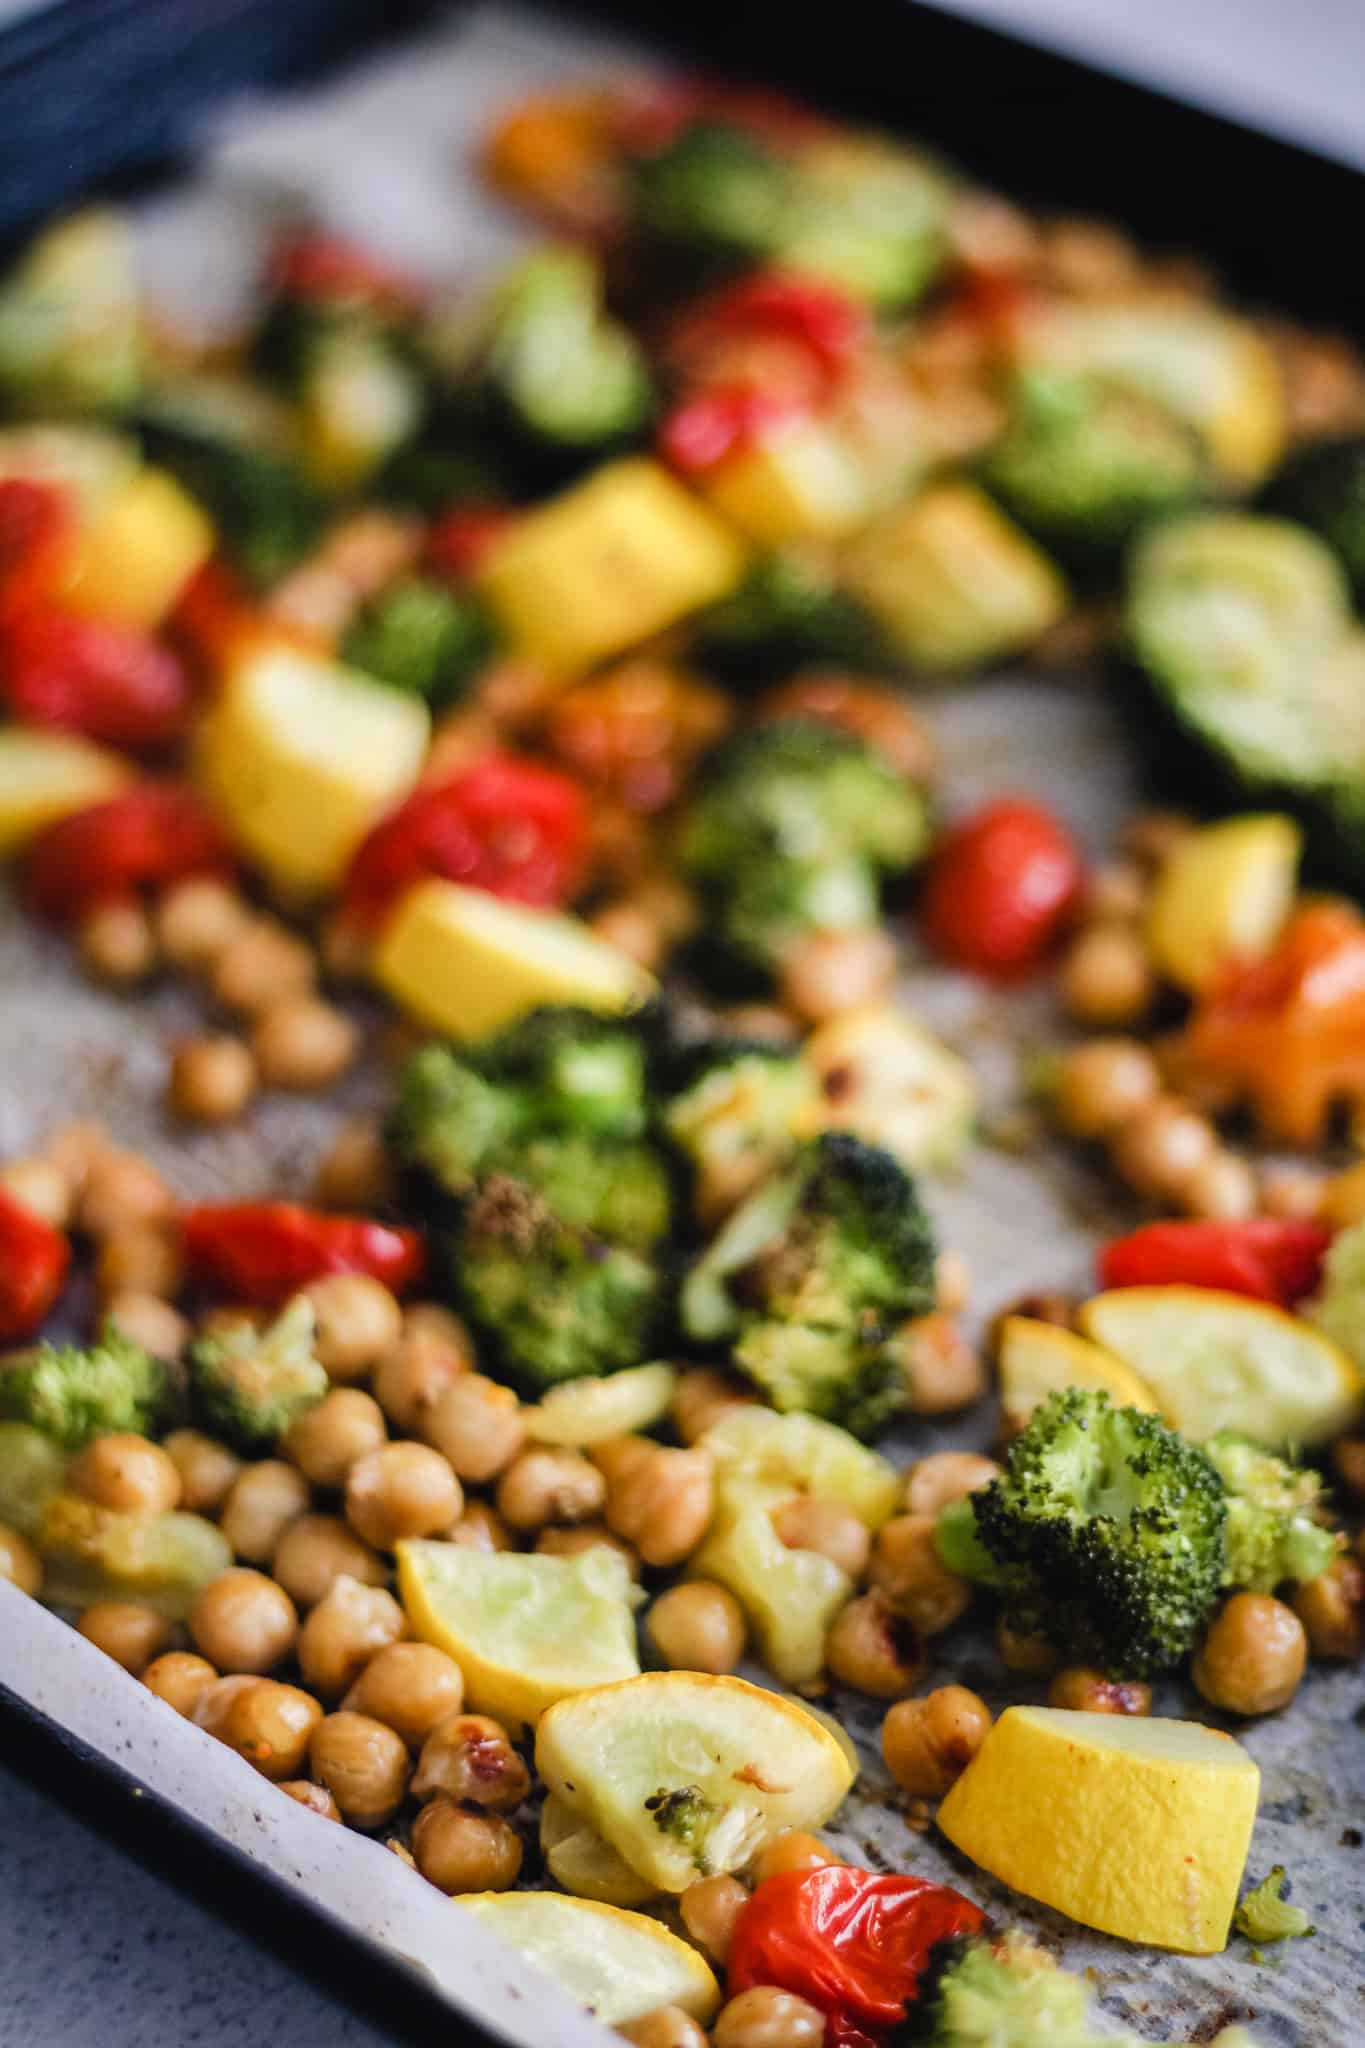 Roasted vegetables and chickpeas on a sheet pan.